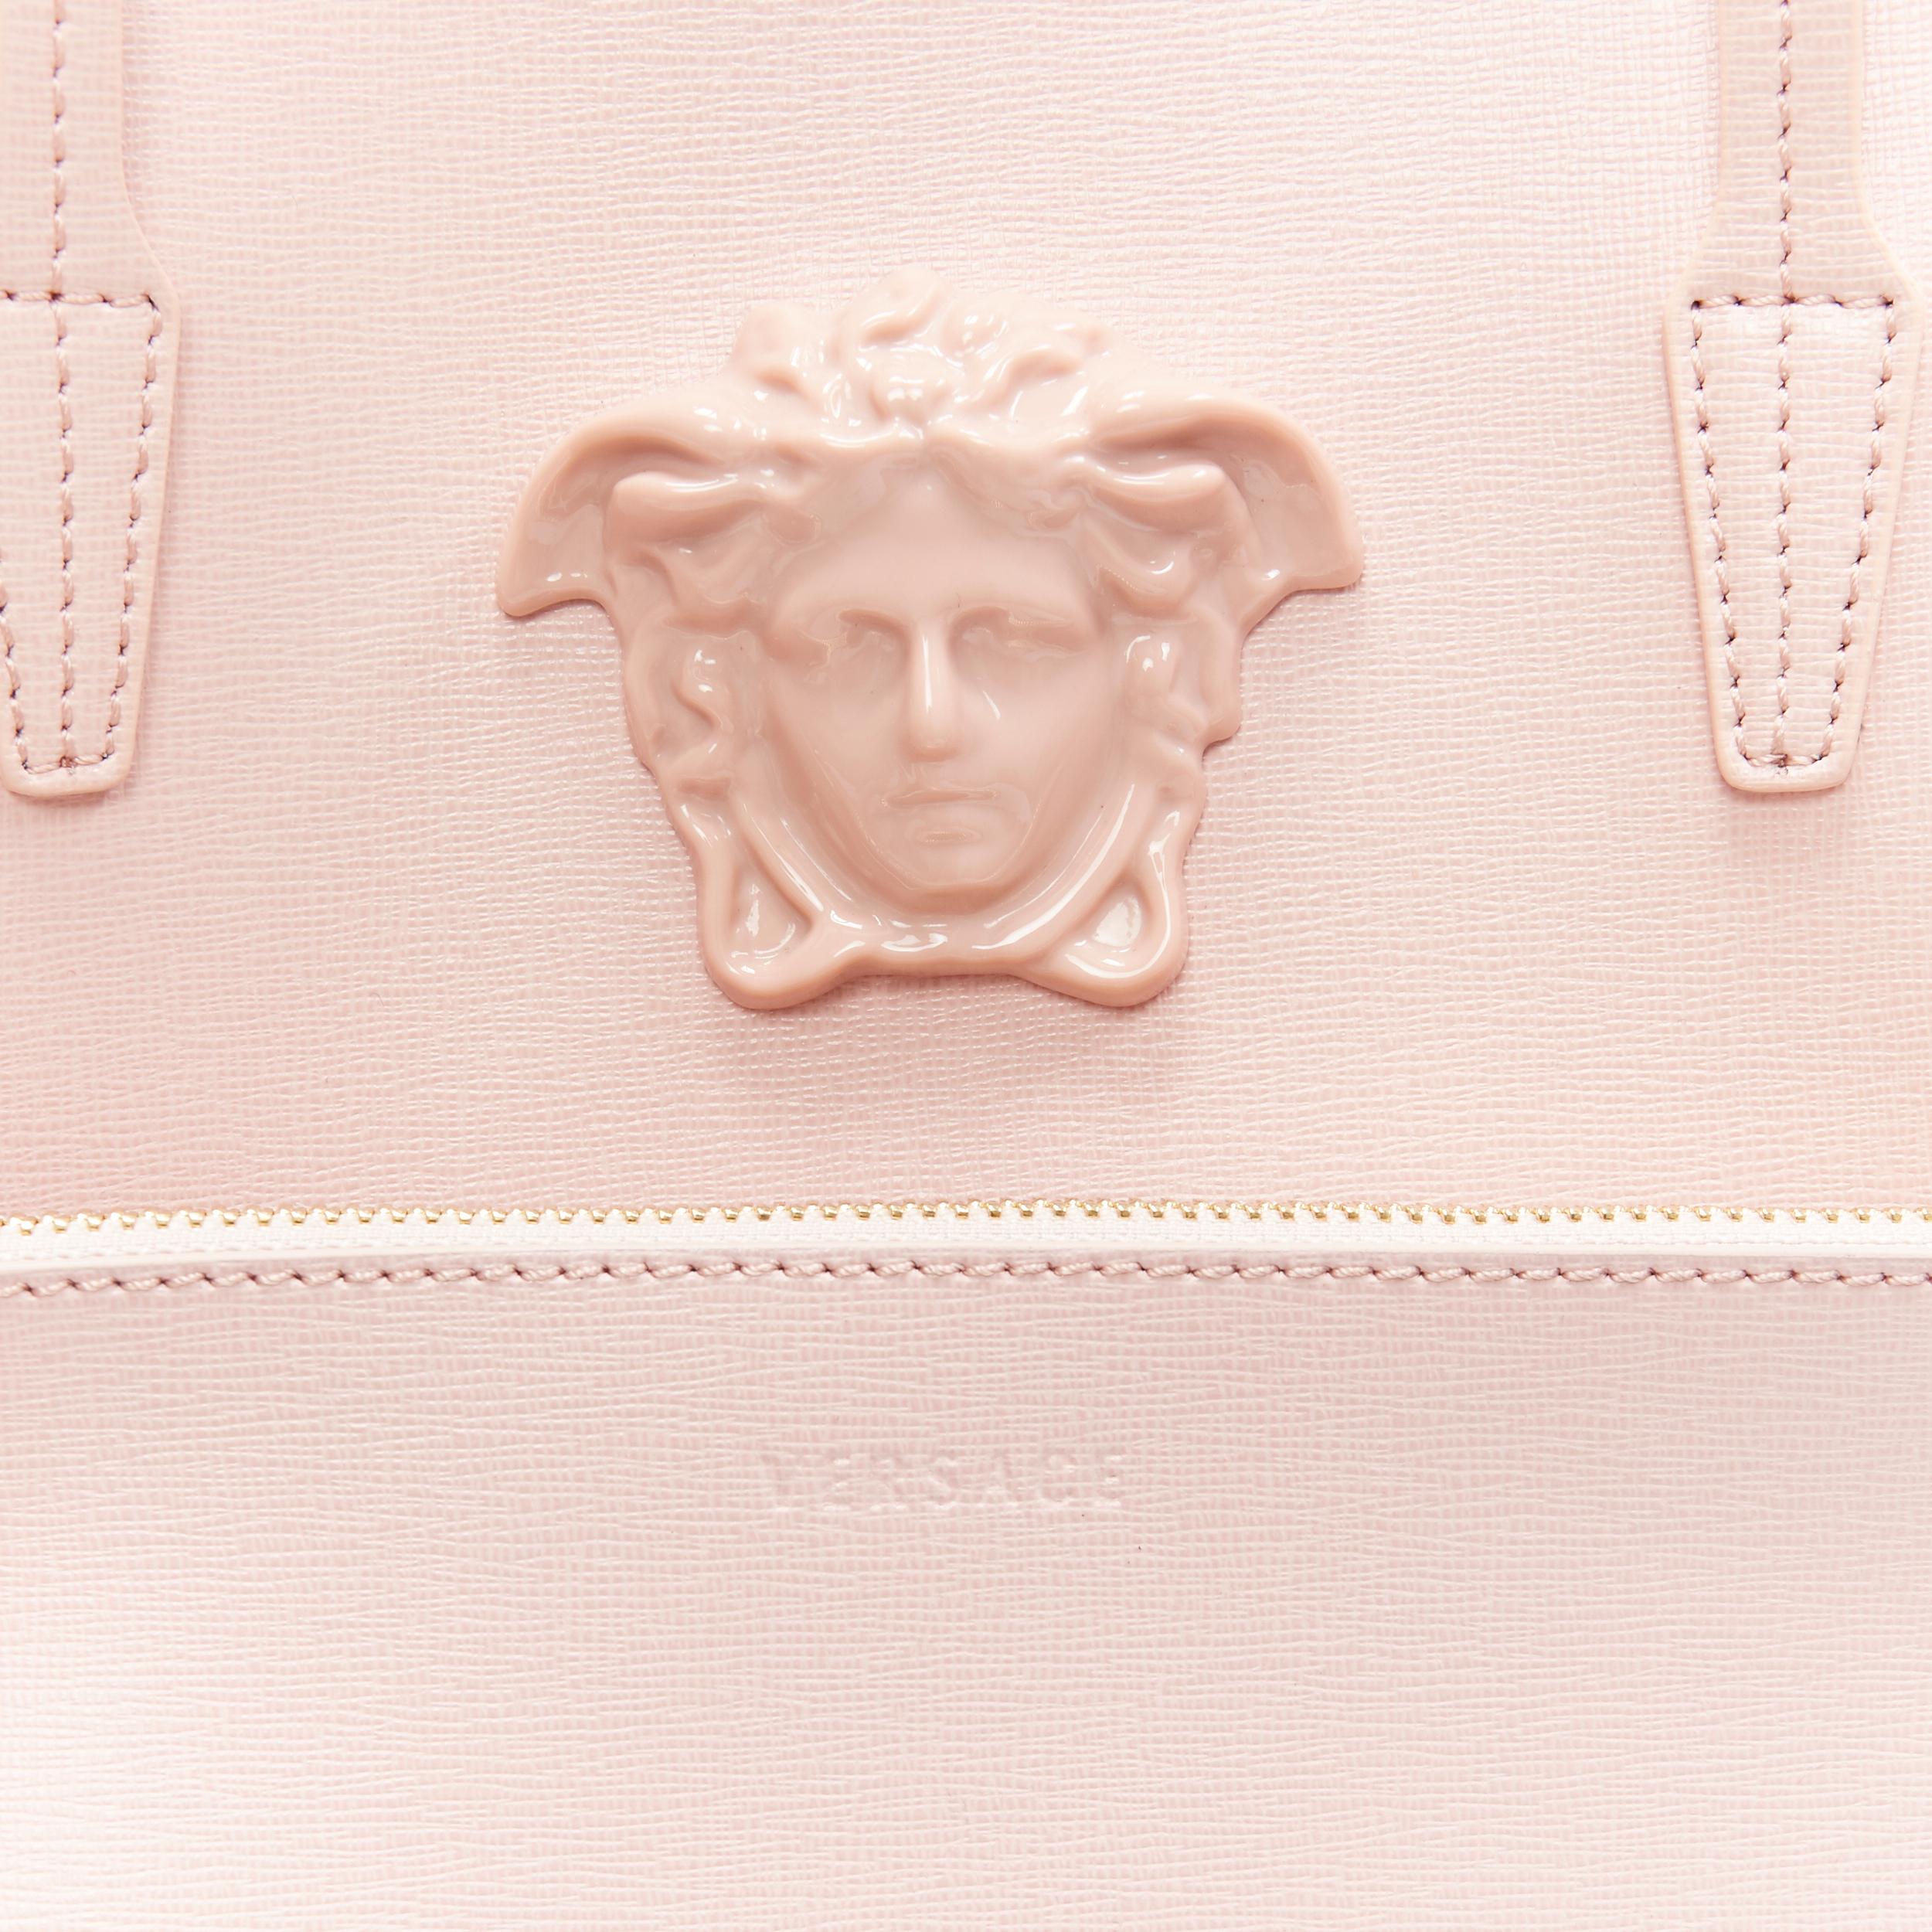 new VERSACE Palazzo Medusa light pink saffiano leather large neverfull tote bag 4